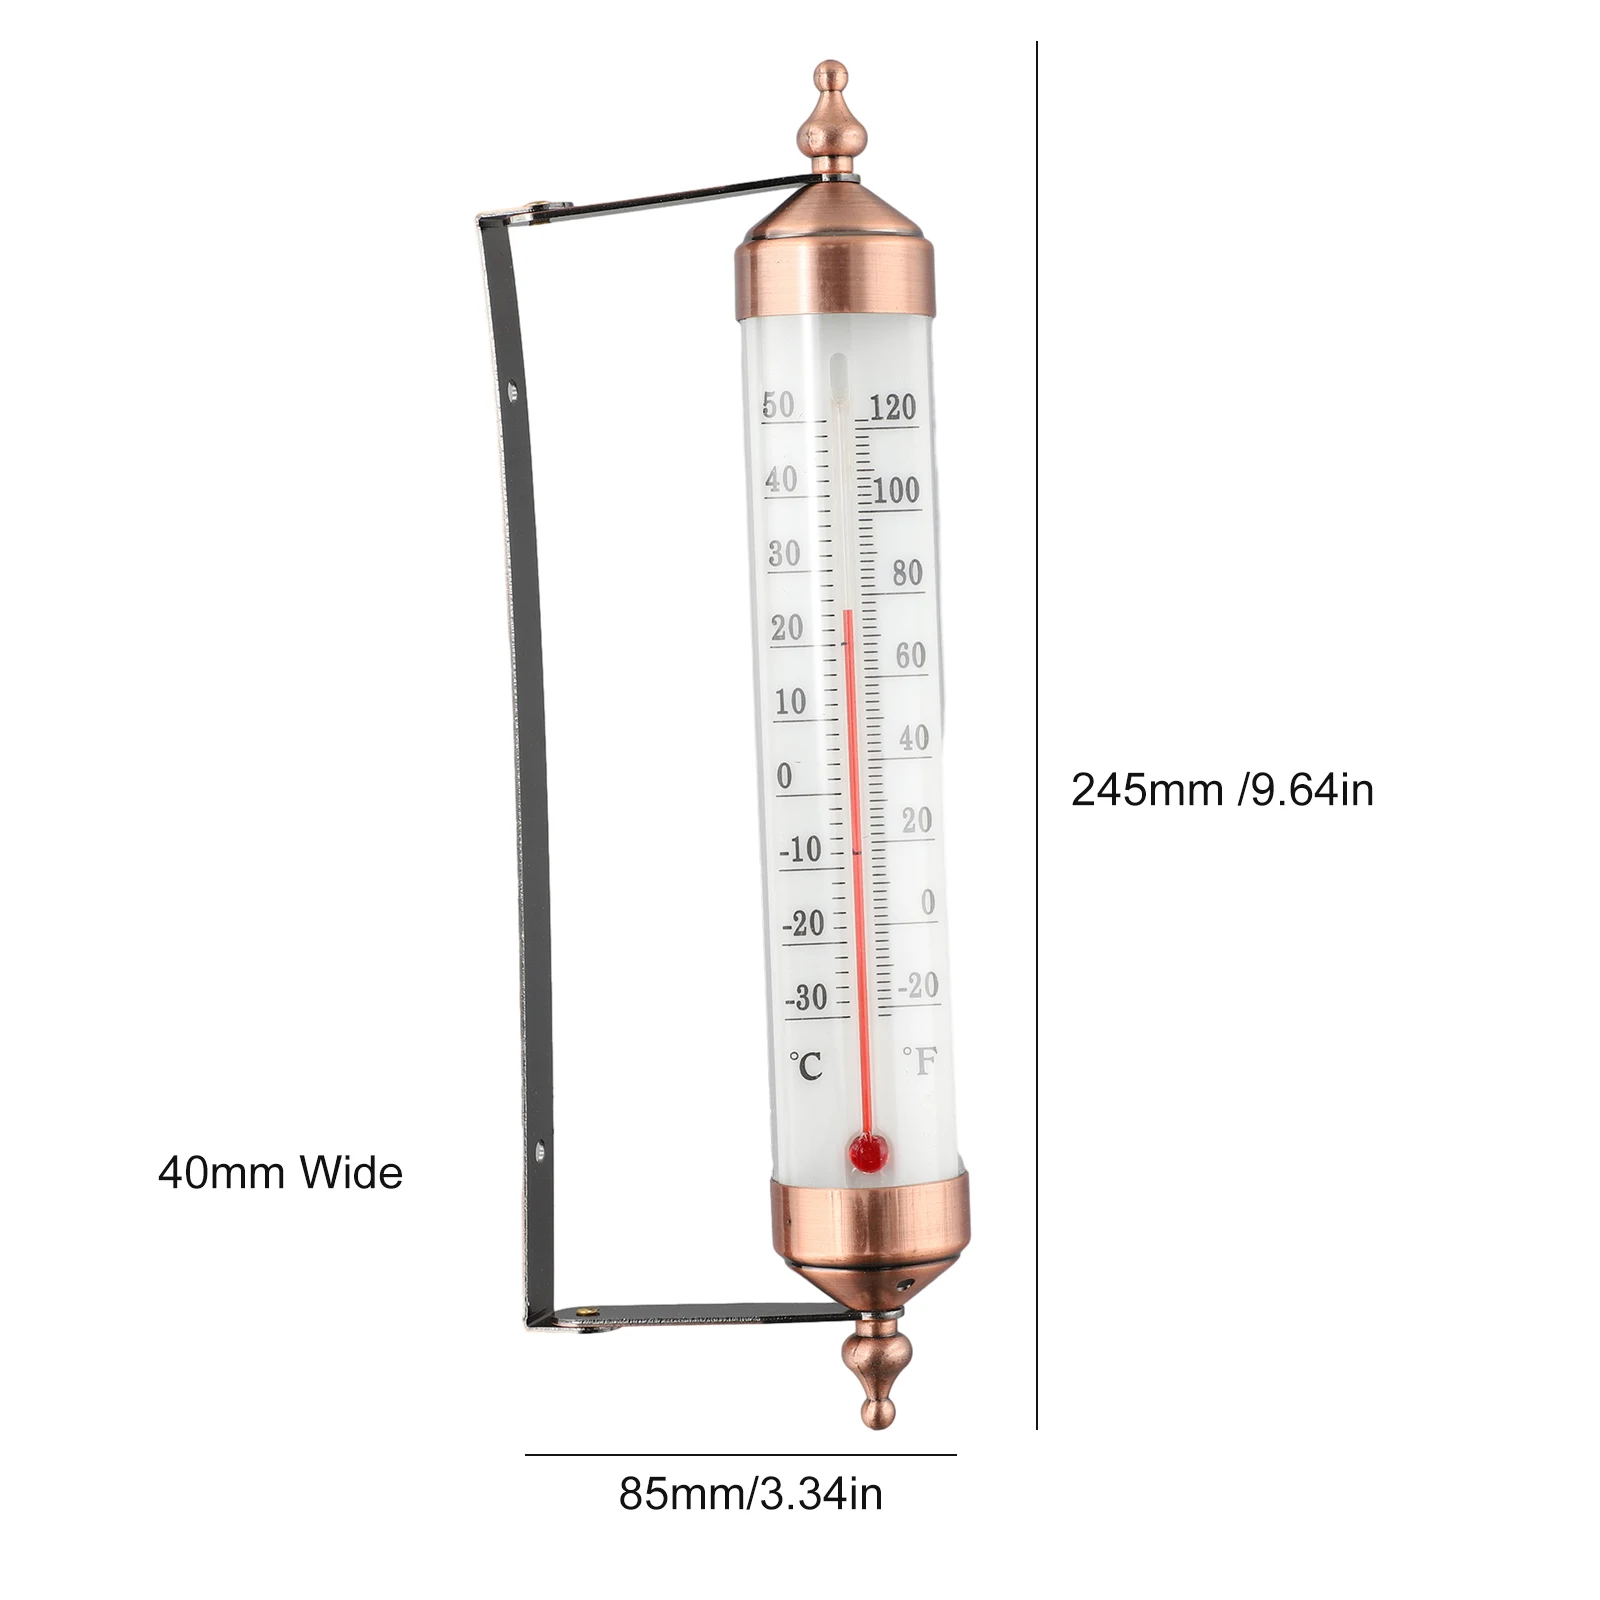 https://ae01.alicdn.com/kf/S64967227748a4c5da8086ca0006e94deh/1Pcs-Outdoor-Thermometer-Garden-Patio-Outside-Wall-Greenhouse-Sun-Terrace-30-50-C-Thermometer-Garden-Outdoor.jpeg